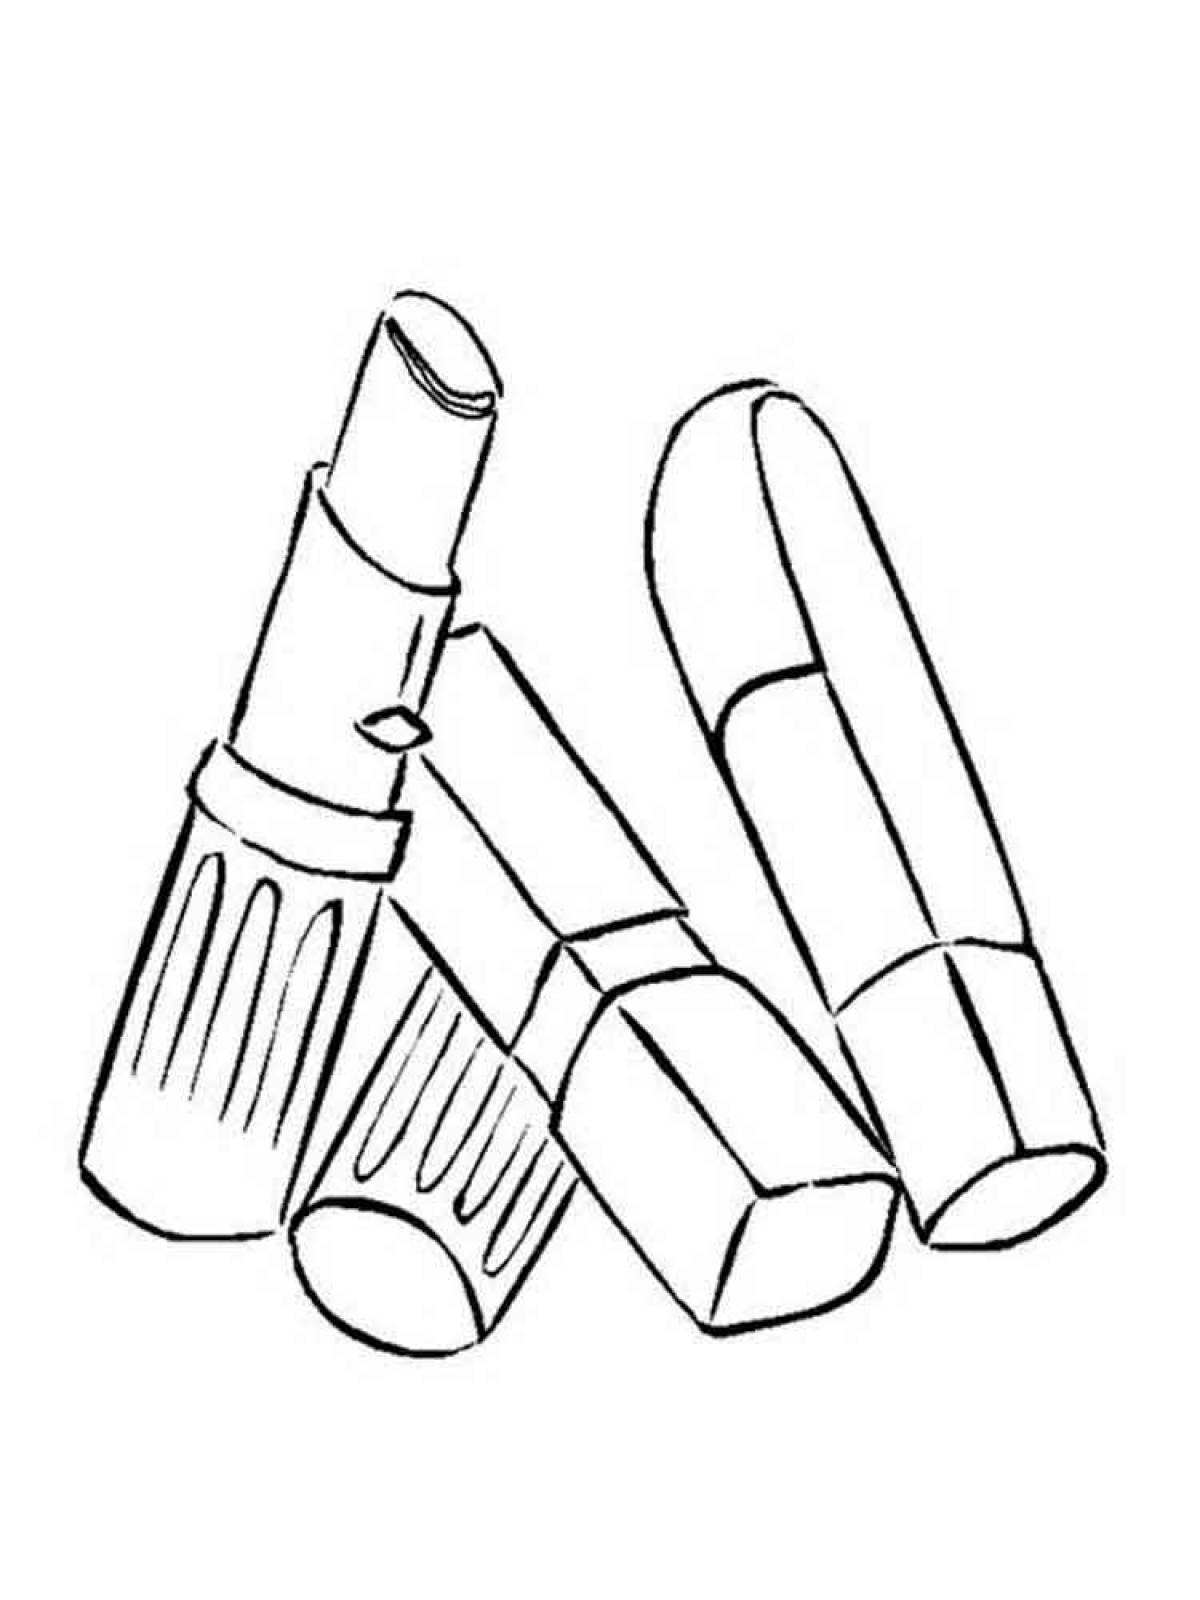 Coloring page glamor cosmetics